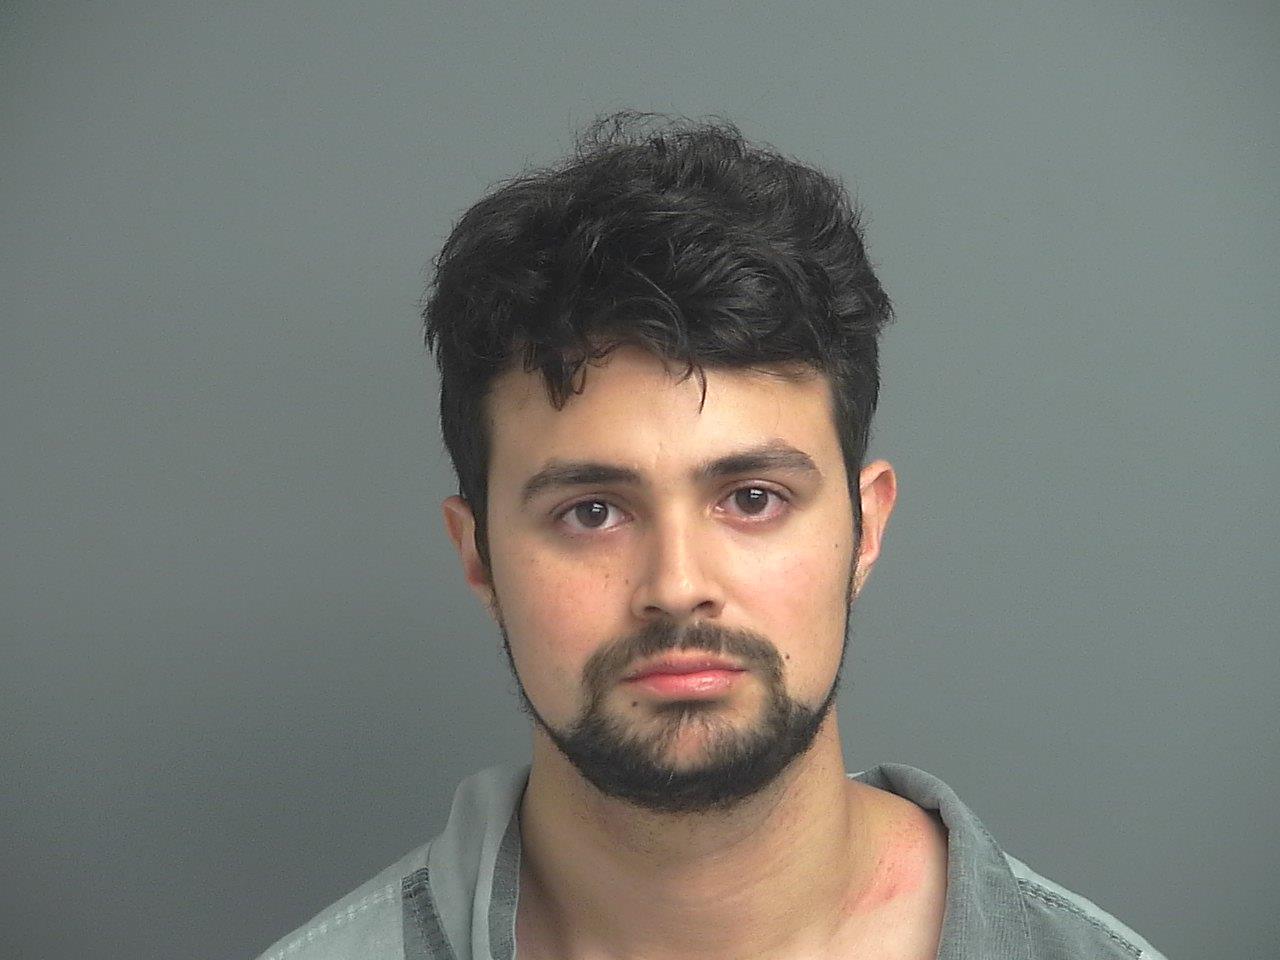 MONTGOMERY COUNTY JAIL BOOKINGS FOR 5/21/19